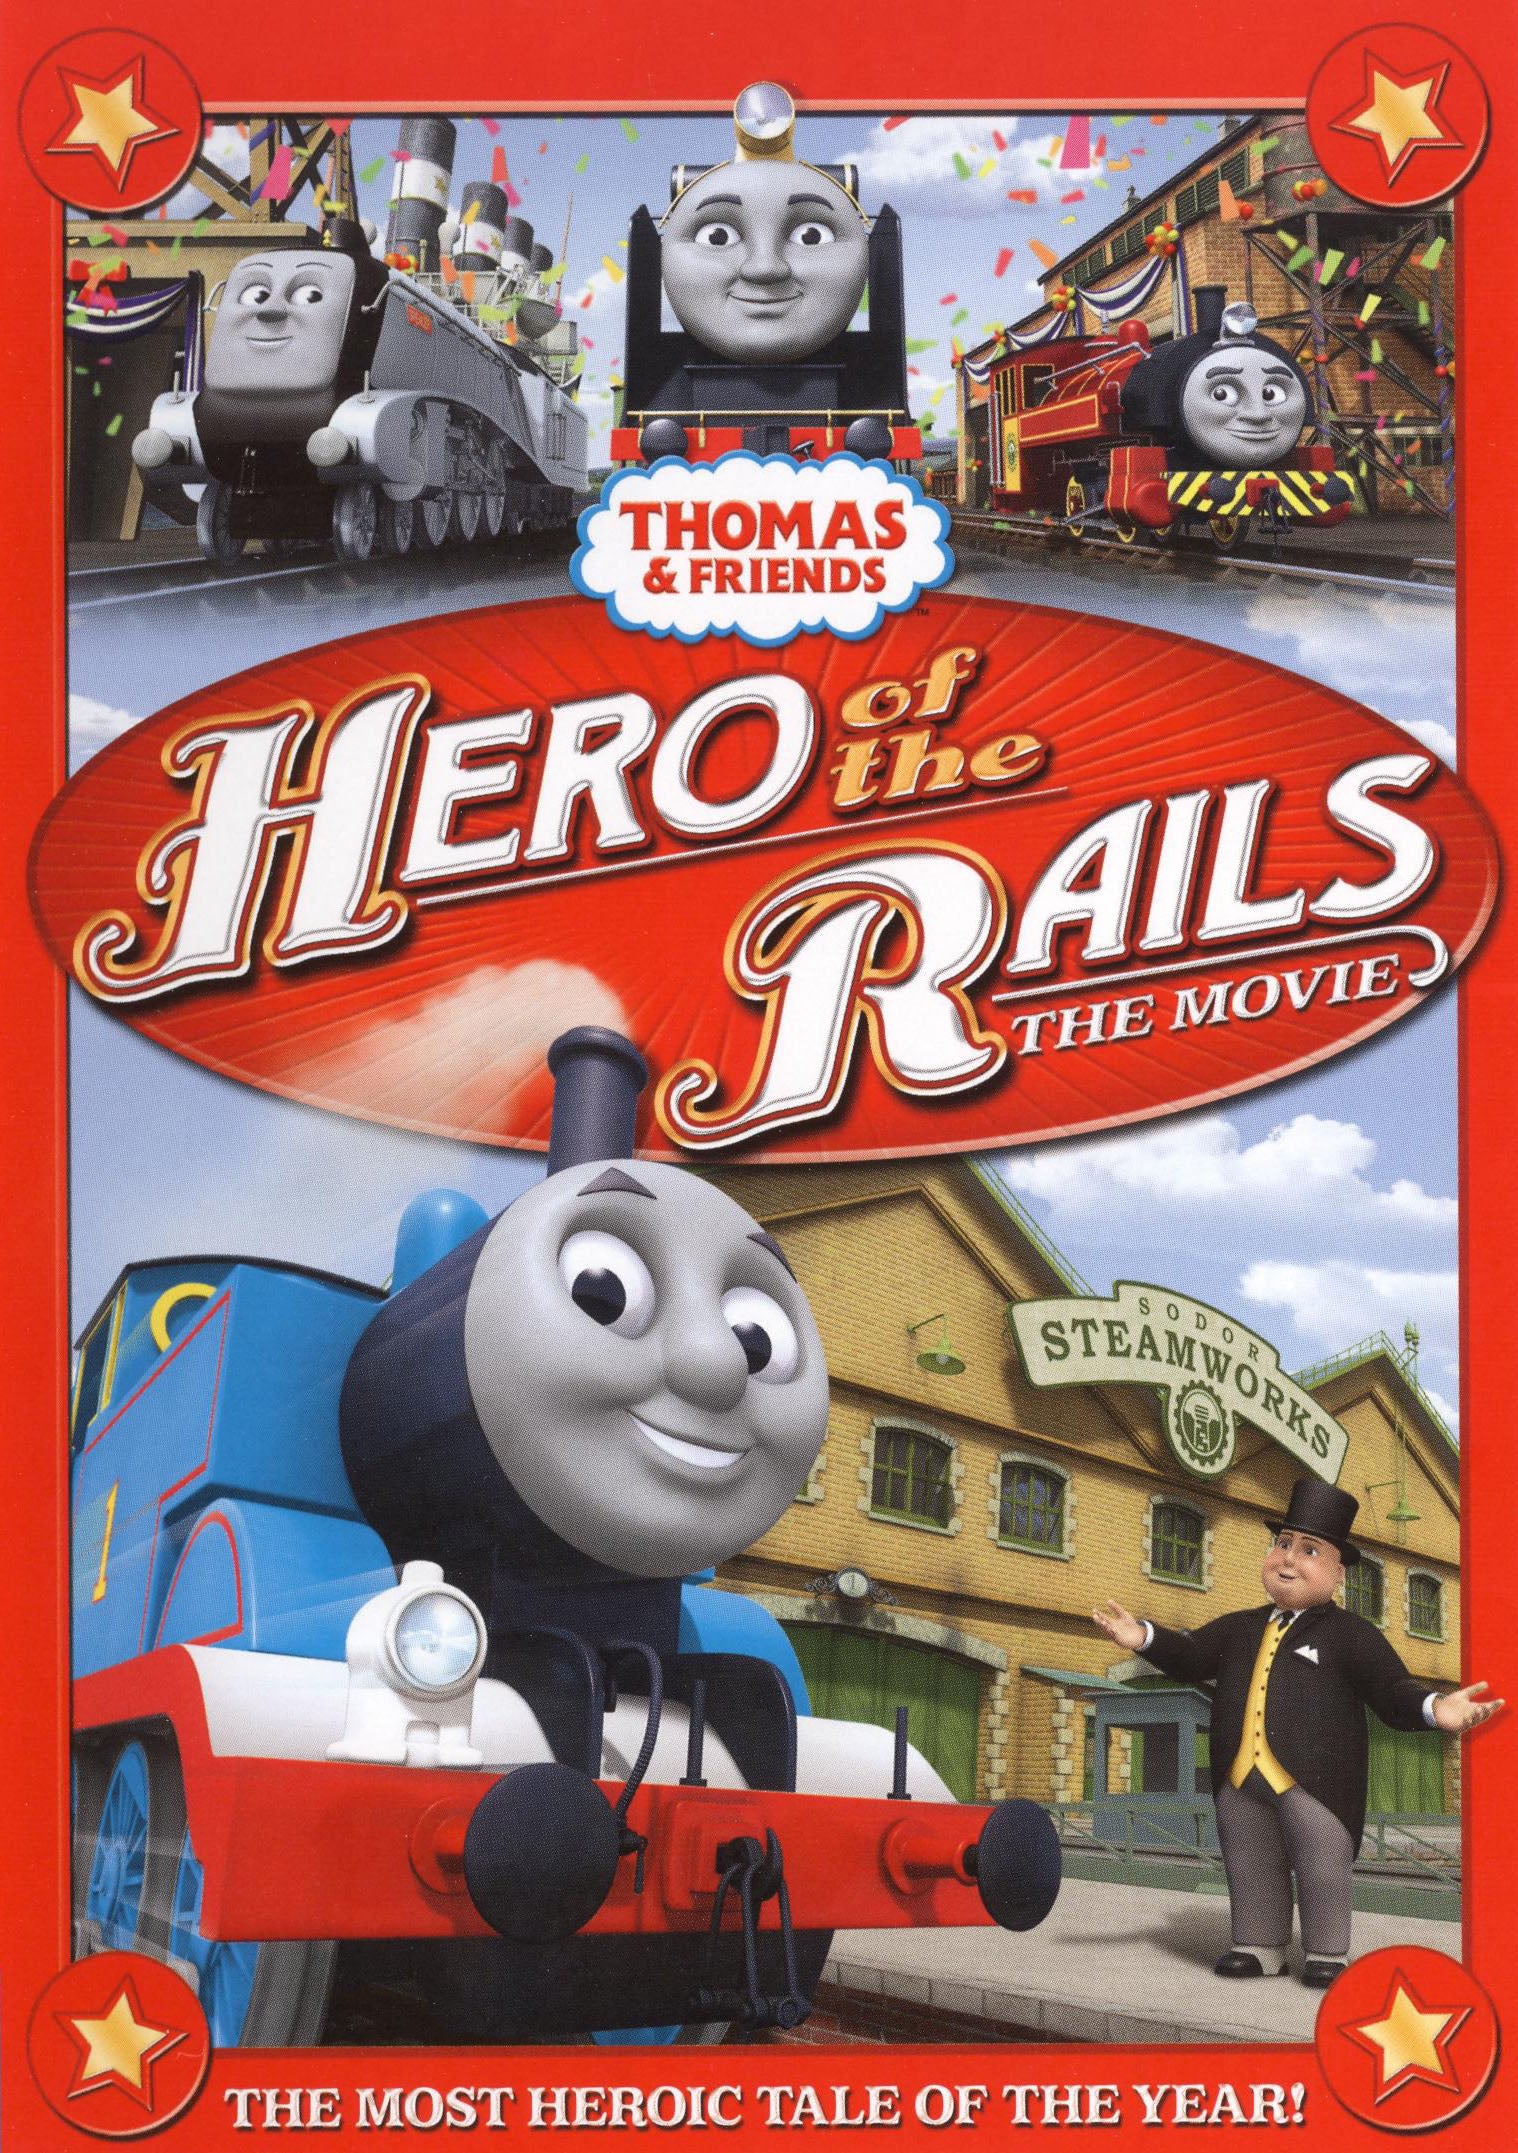 Thomas & Friends: Hero of the Rails - The Movie cover art